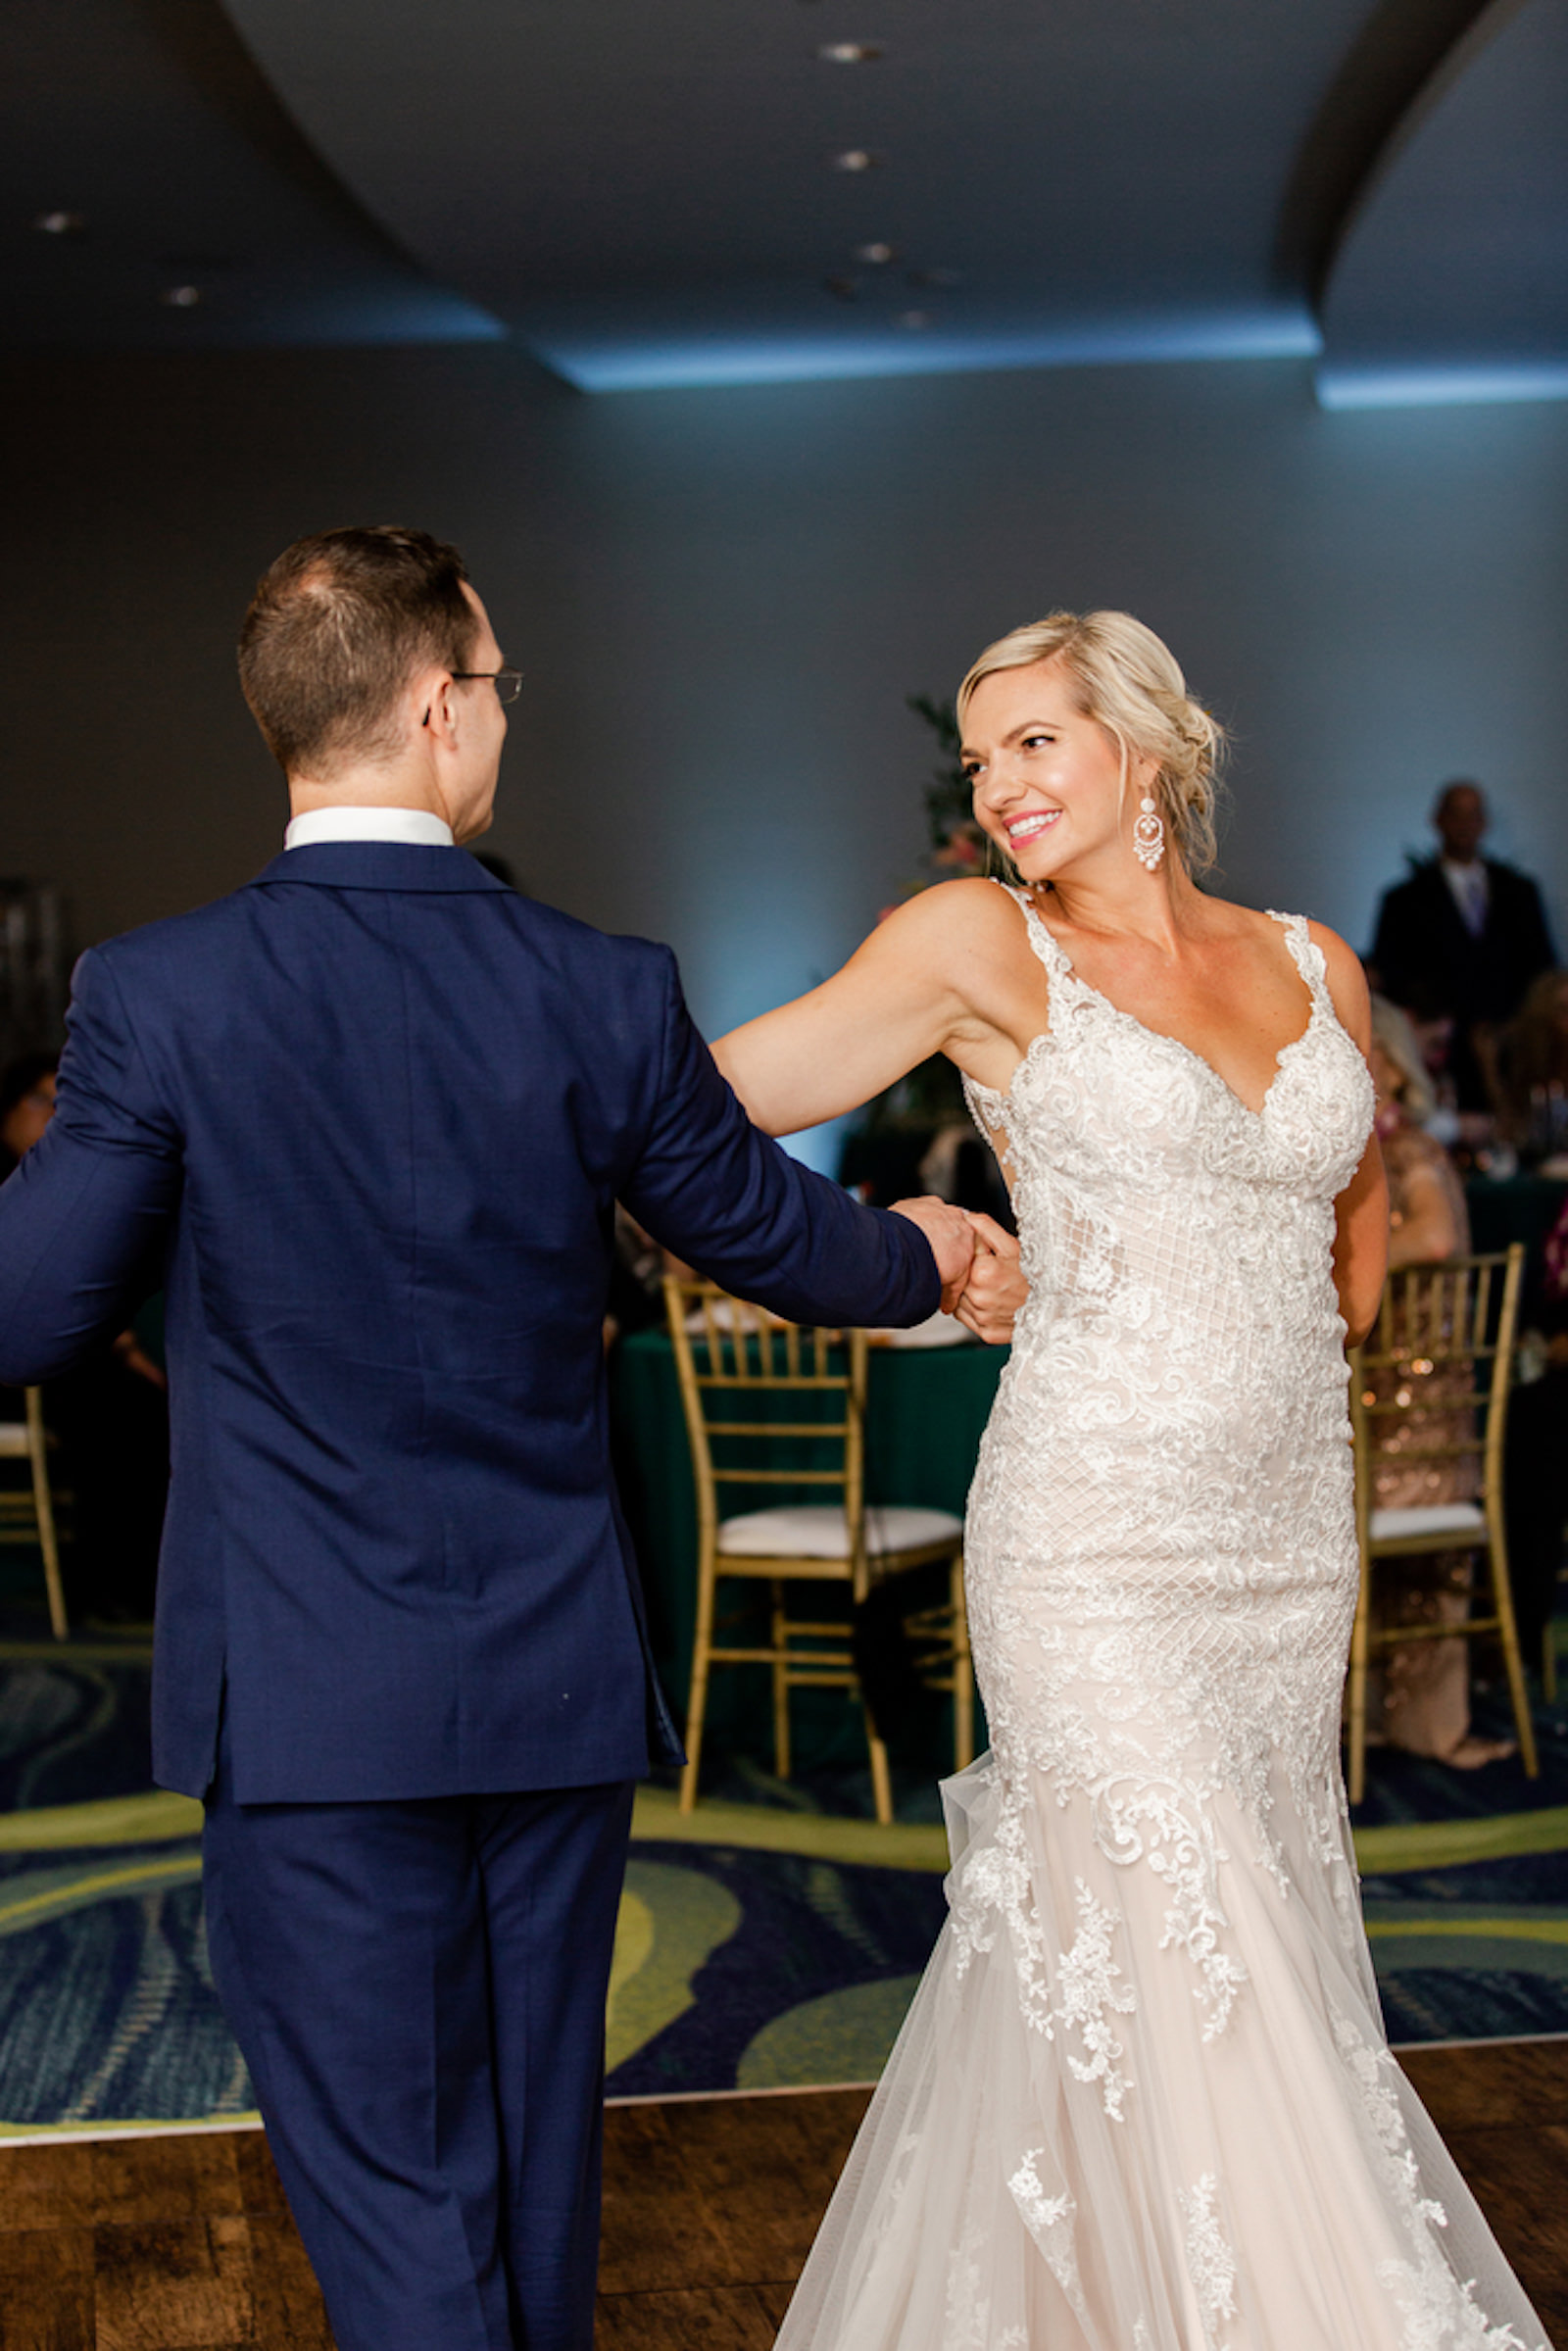 Tropical Clearwater Beach Bride and Groom First Dance Wedding Reception Photo | Tampa Bay Wedding DJ Grant Hemond and Associates